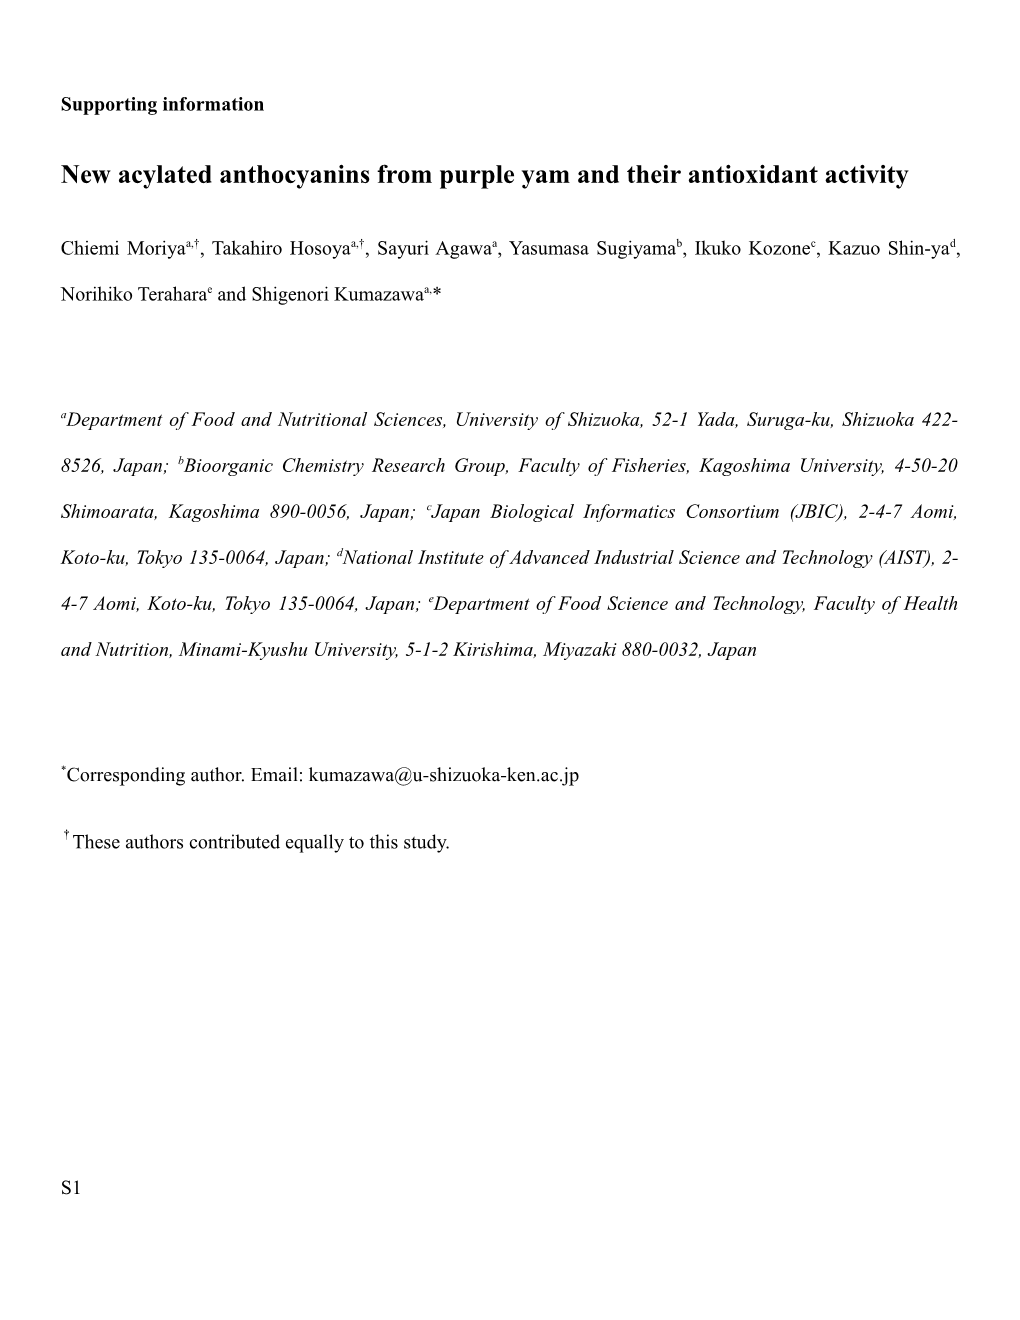 New Acylated Anthocyanins from Purple Yam and Their Antioxidant Activity